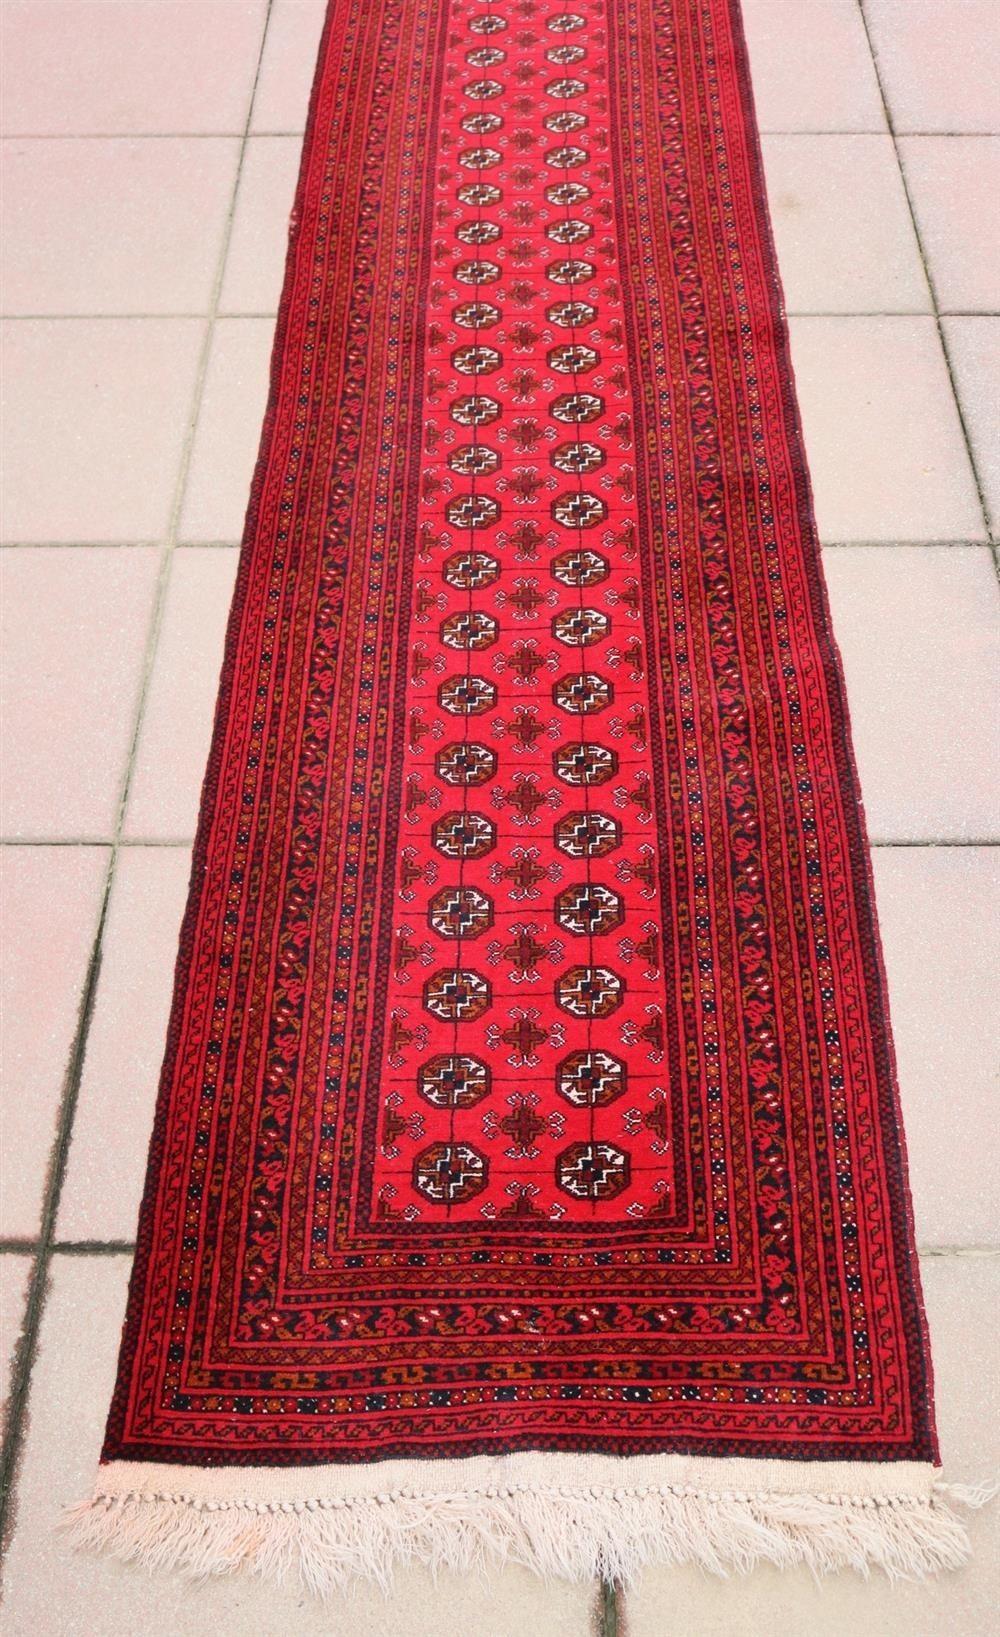 Exceptional Turkestan runner presents a stunning display of deep red tones and traditional geometric medallions adorning its surface. The deep red hues are complemented by accents of vibrant blue, warm orange, and crisp white tones, creating a